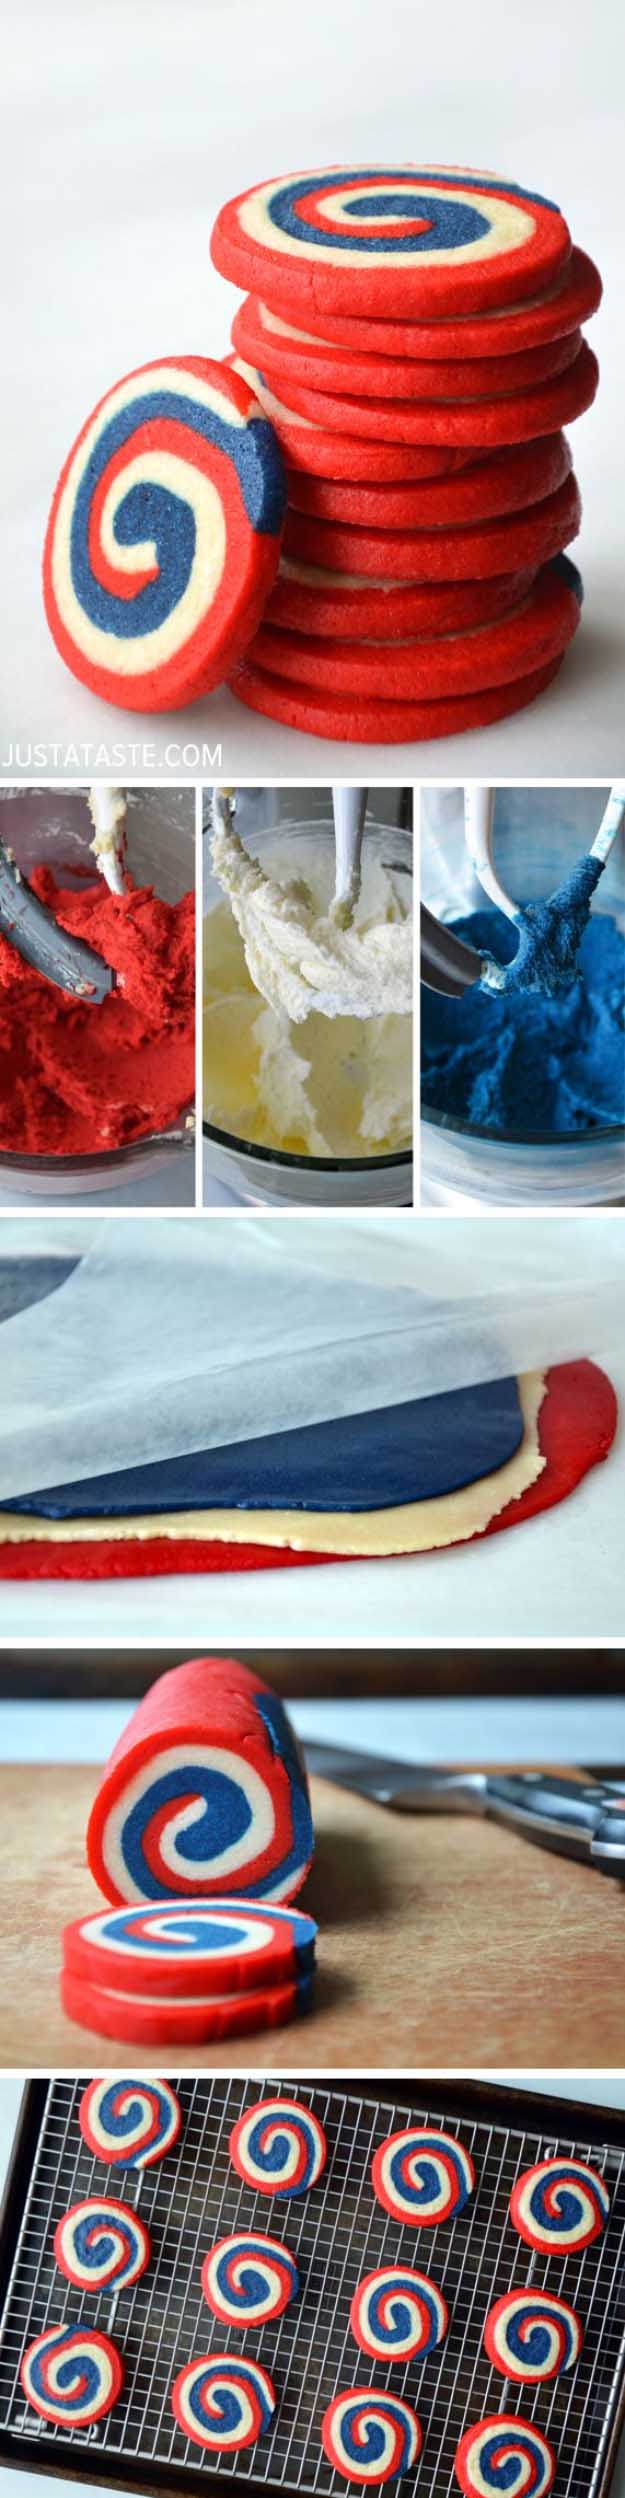 4th of July Dessert Ideas Patriotic Pinwheel Cookie Recipe| DIY Projects & Crafts by DIY JOY #fourthofjuly #july4th #desserts